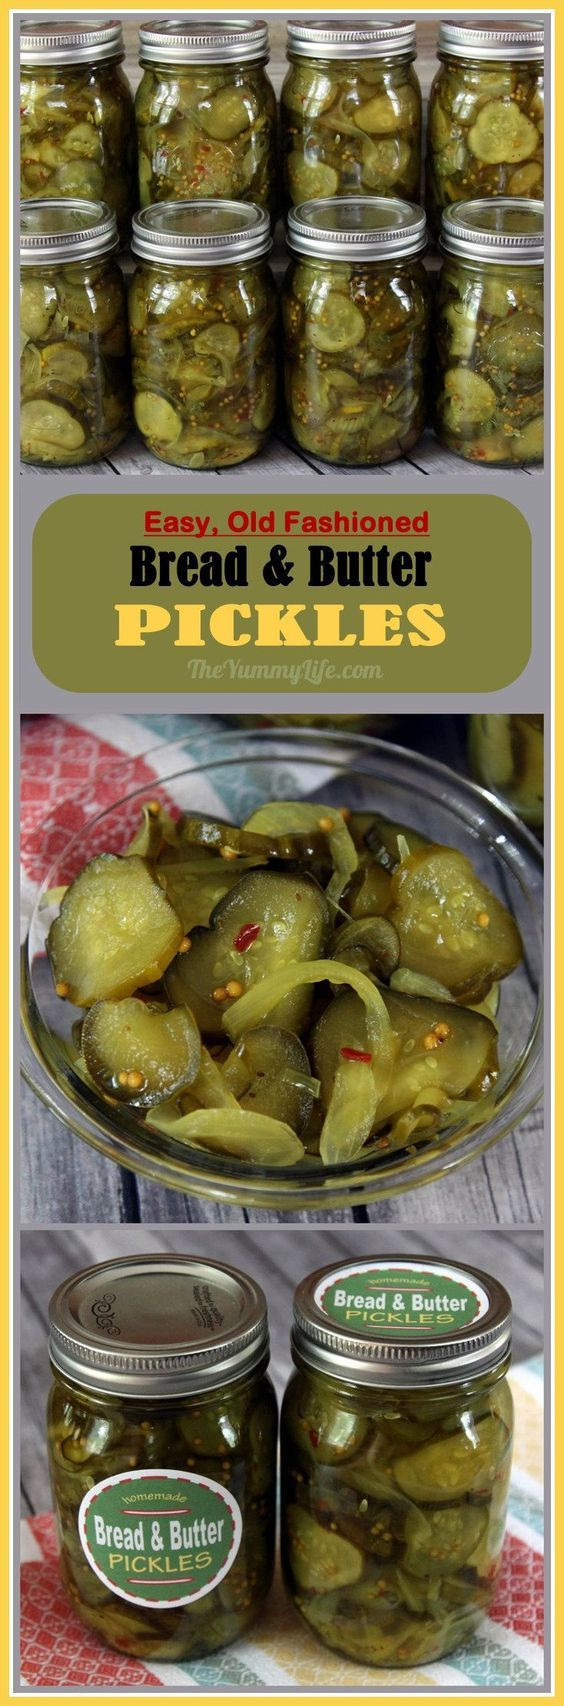 Bread And Butter Pickle Canning Recipe
 Bread and Butter Pickles Recipe